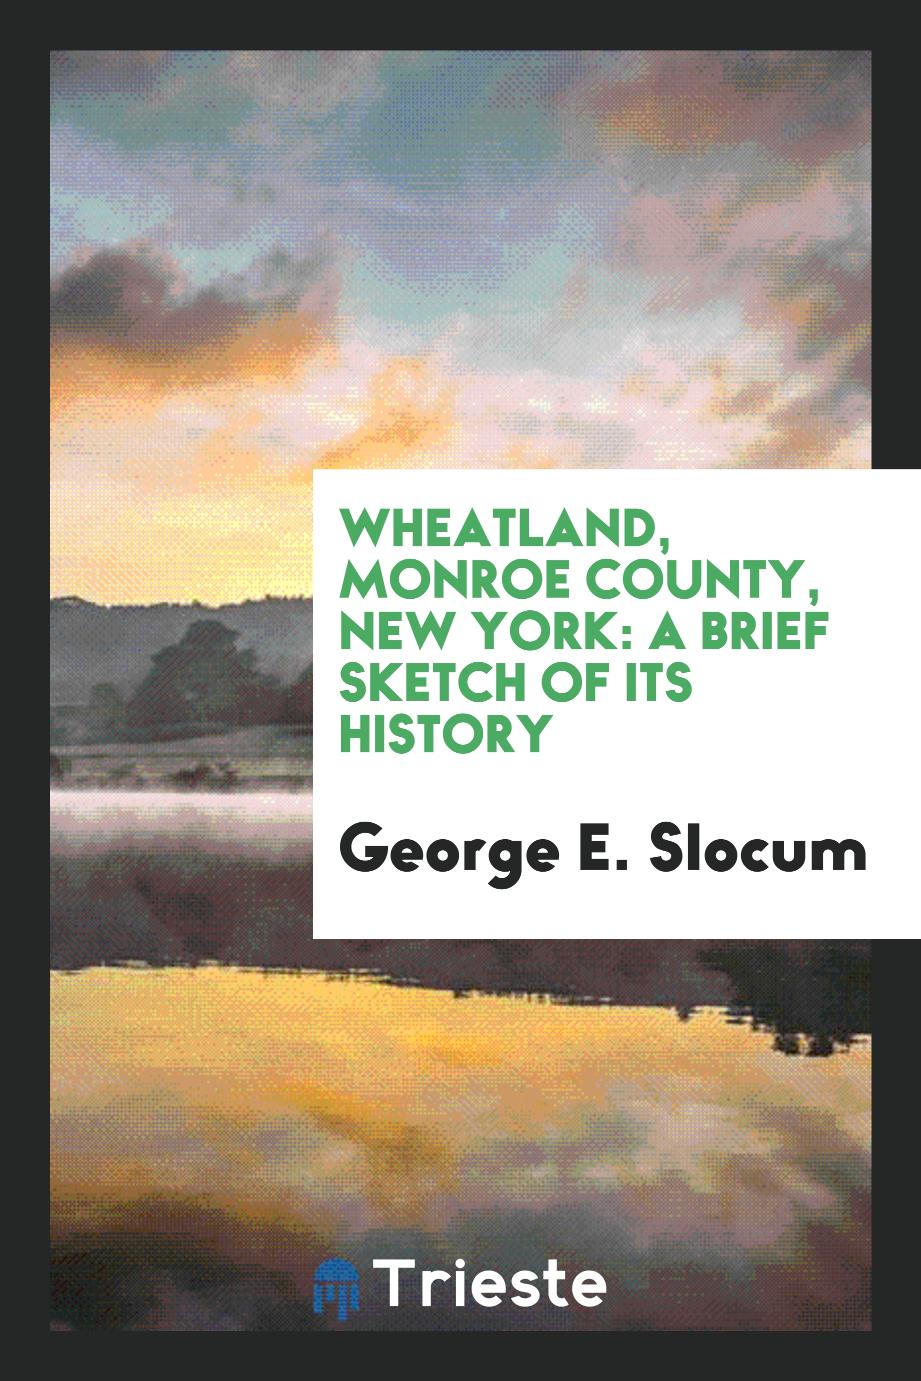 Wheatland, Monroe County, New York: A Brief Sketch of Its History